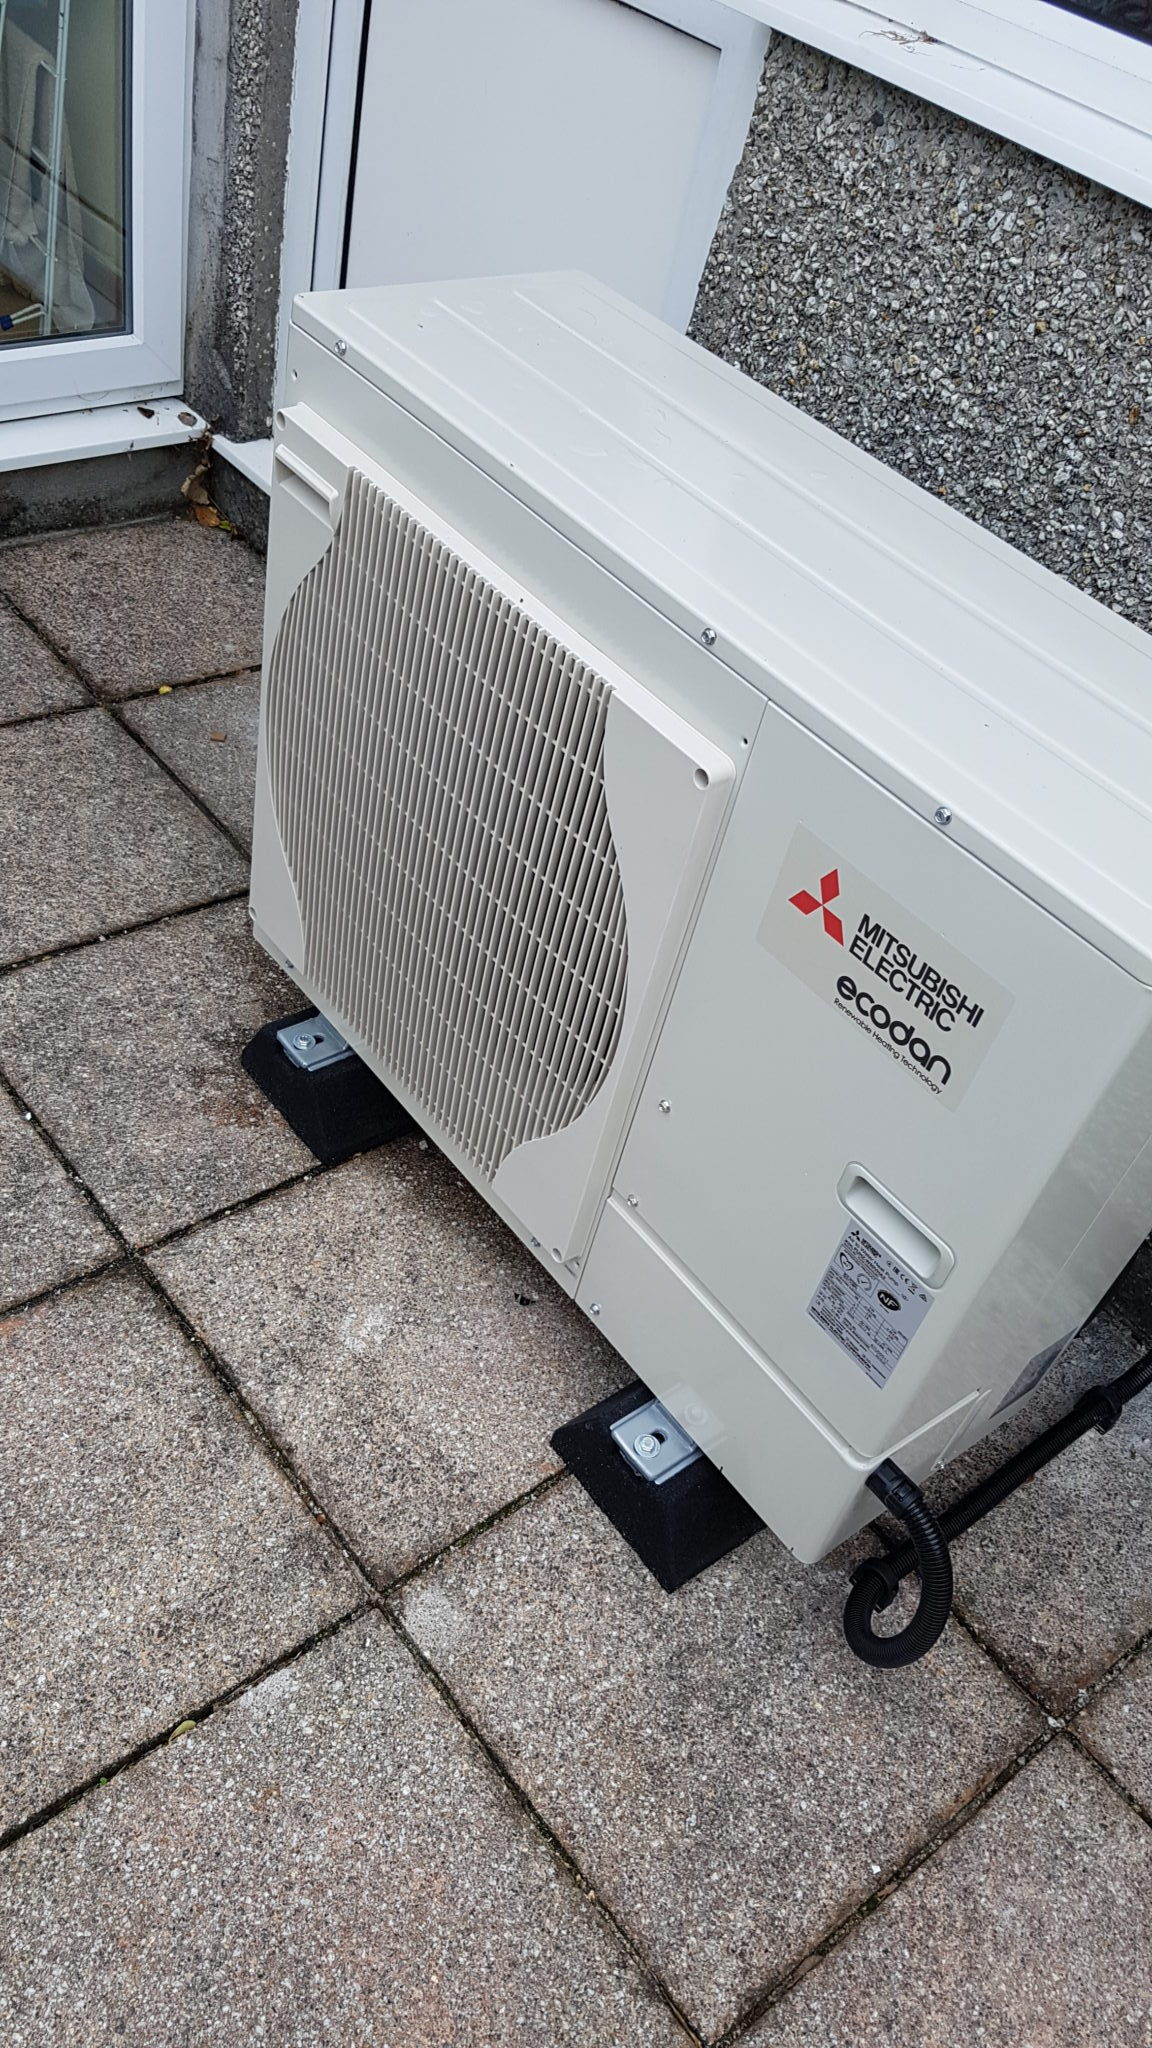 Mitsubishi's 5kW air source heat pump unit, installed in The Lizard.